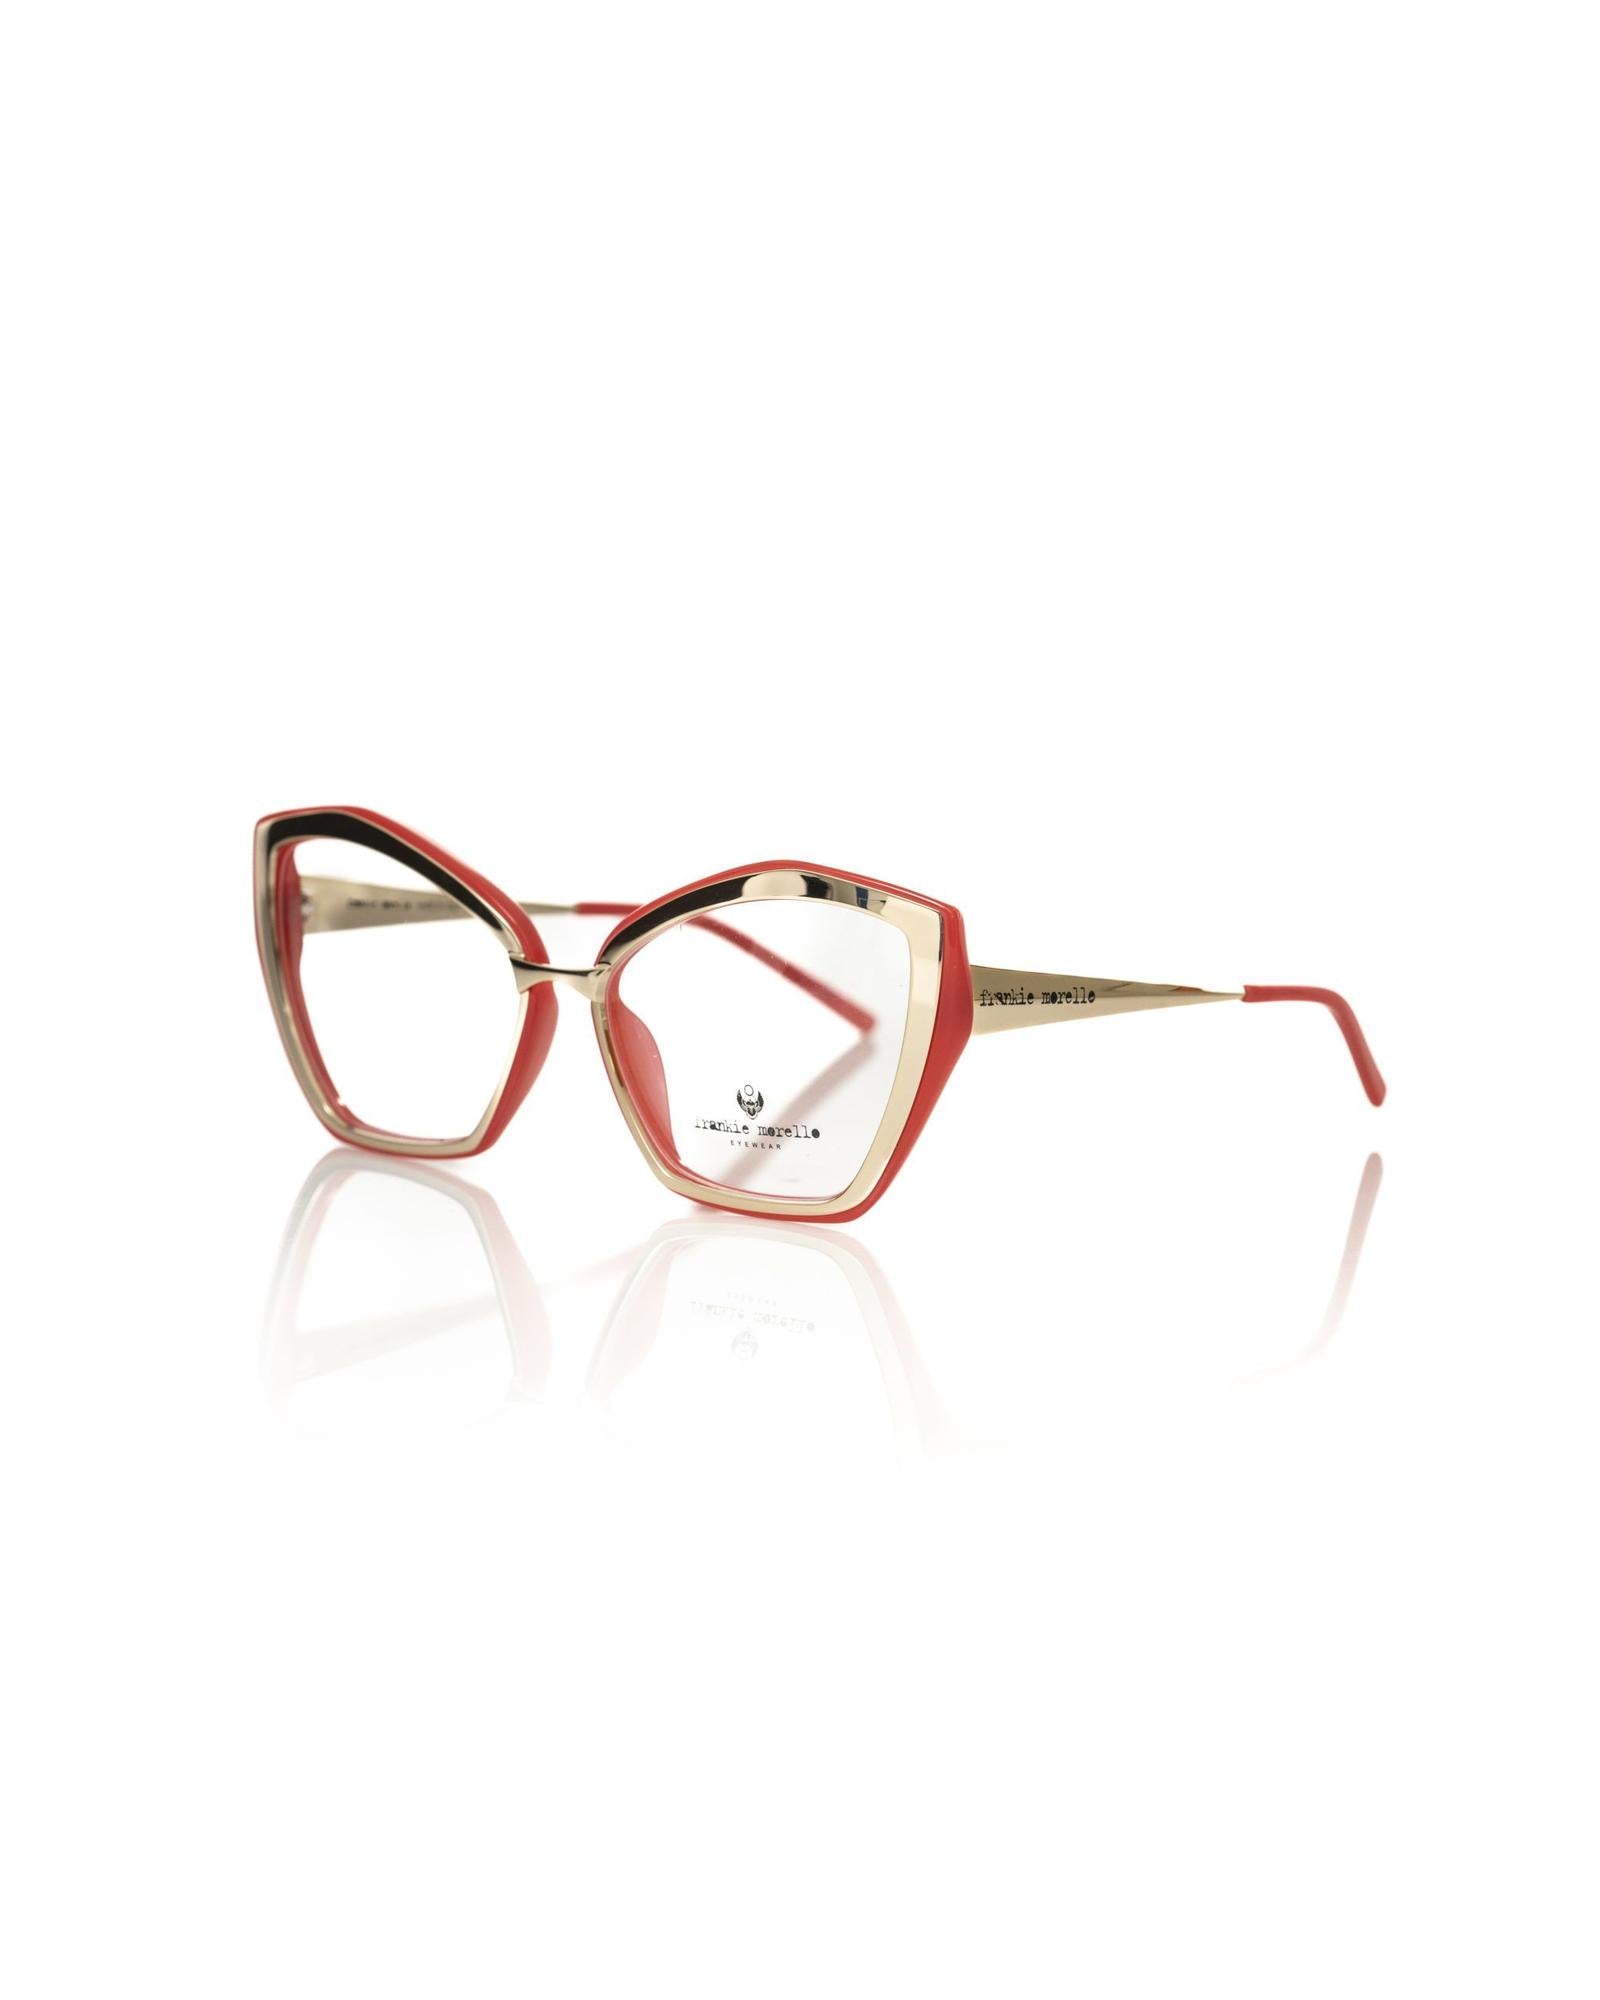 Gold Metal Butterfly Eyeglasses with Coral Interior One Size Women